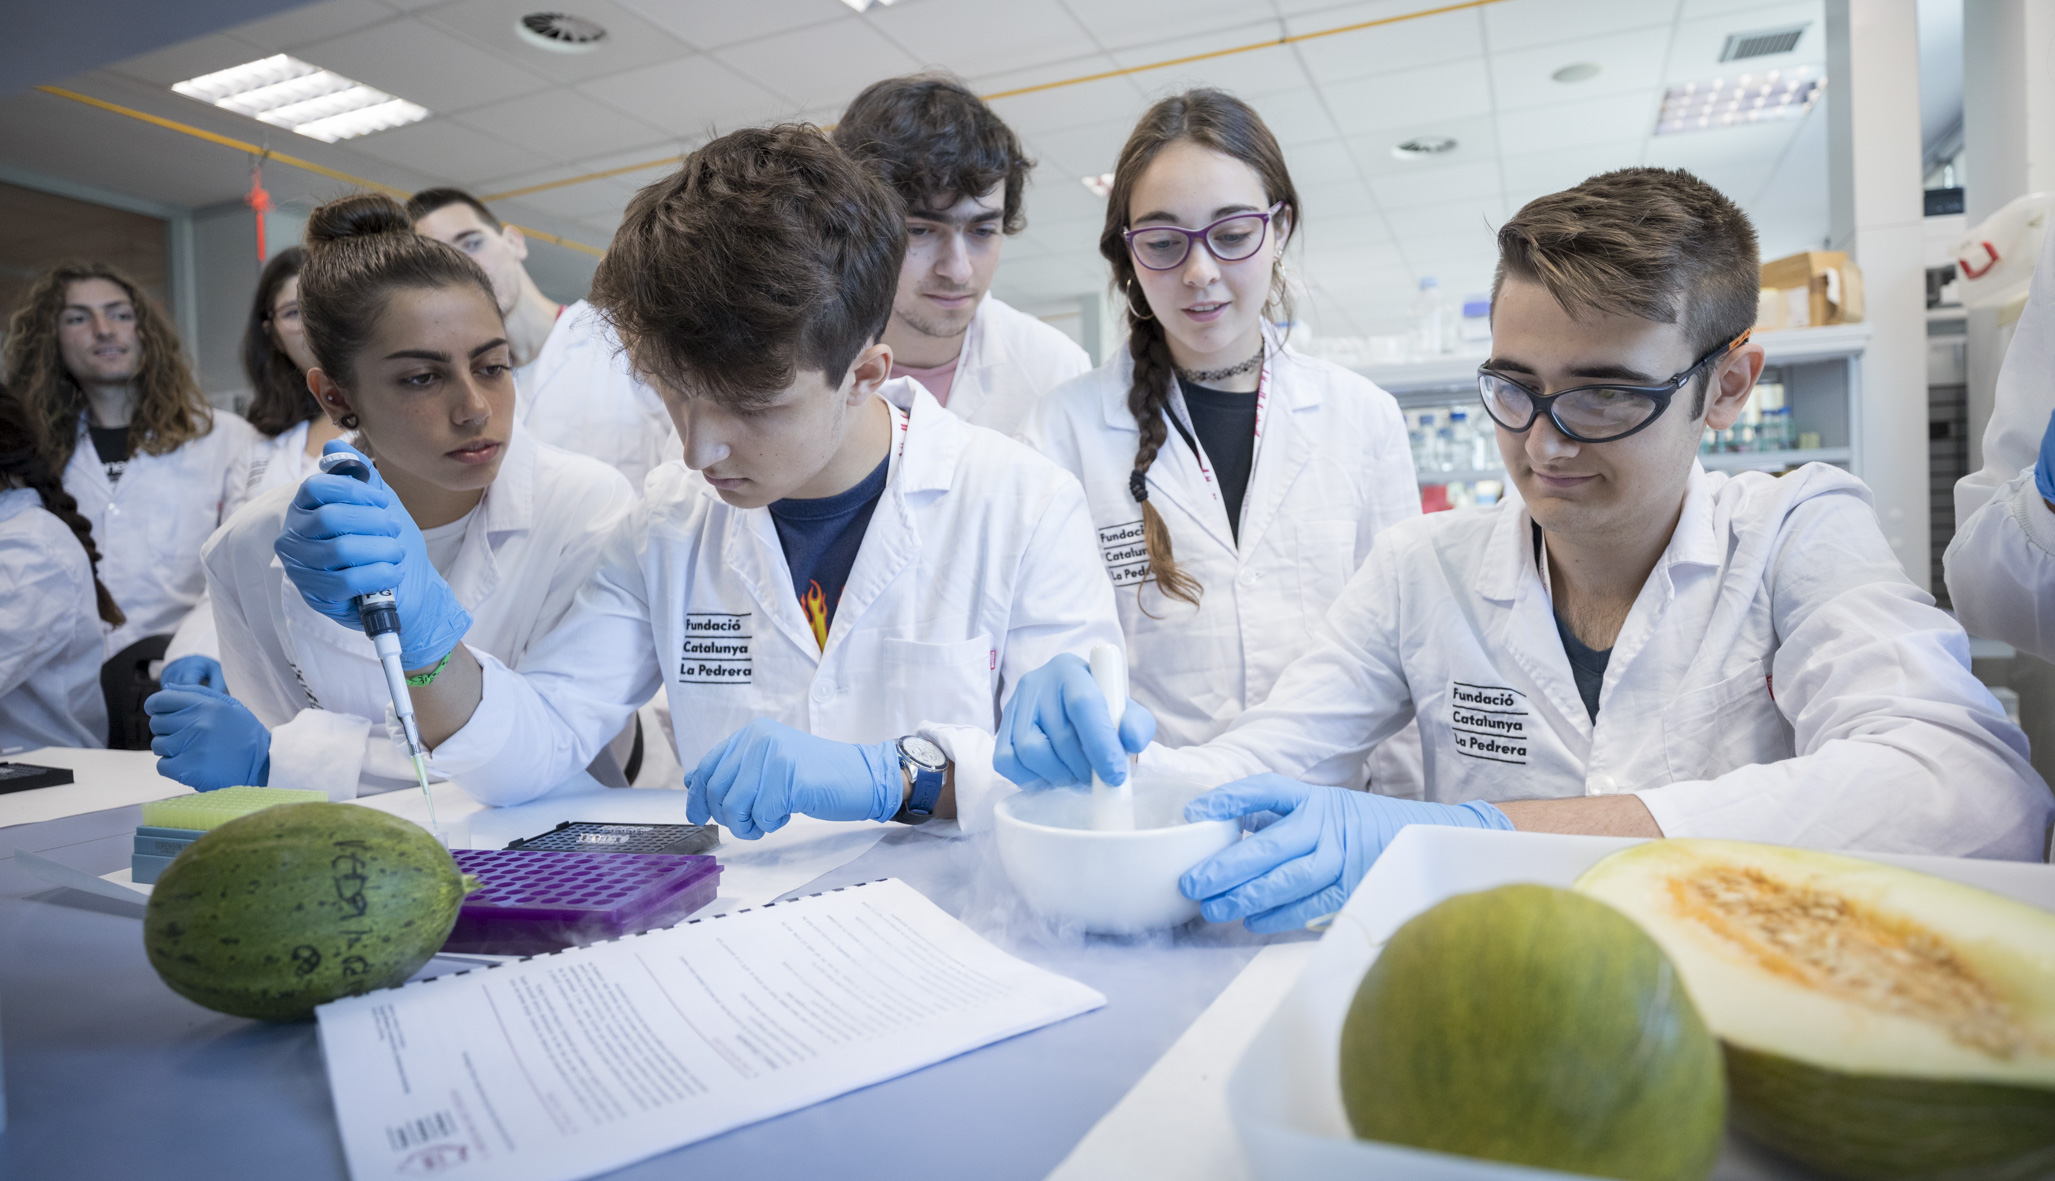 Science Academy: promoting scientific vocations among young people as an innovation challenge